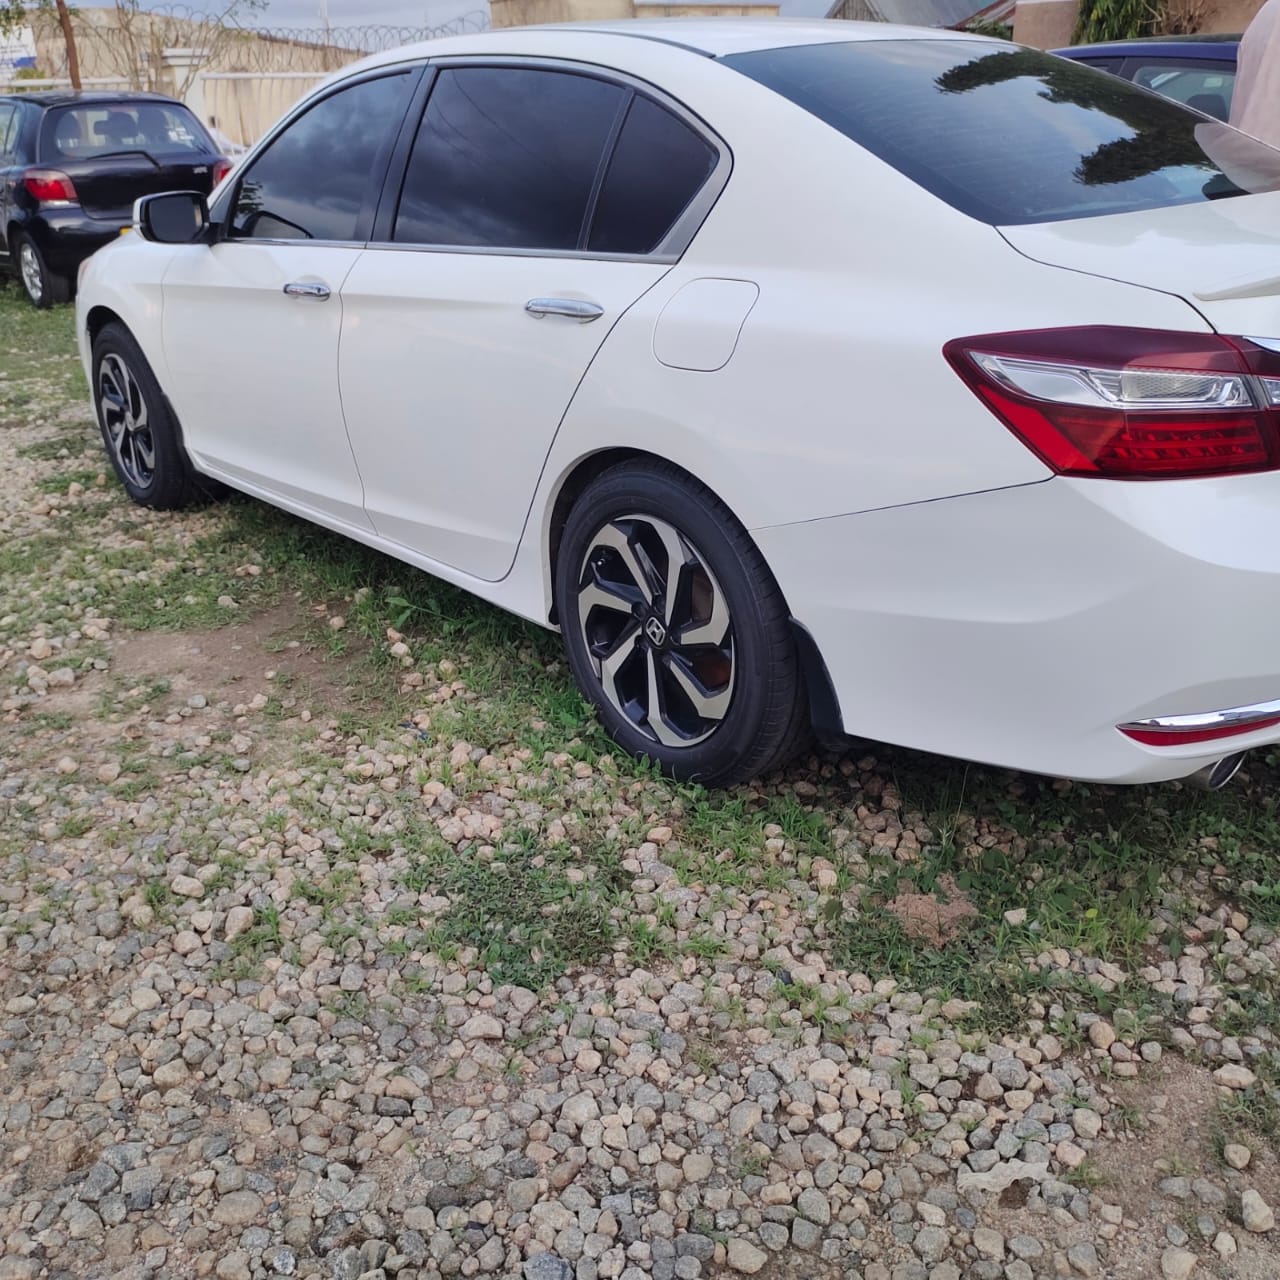 Suspected car thief poses as potential buyer and absconds with Honda vehicle during test drive in Bauchi